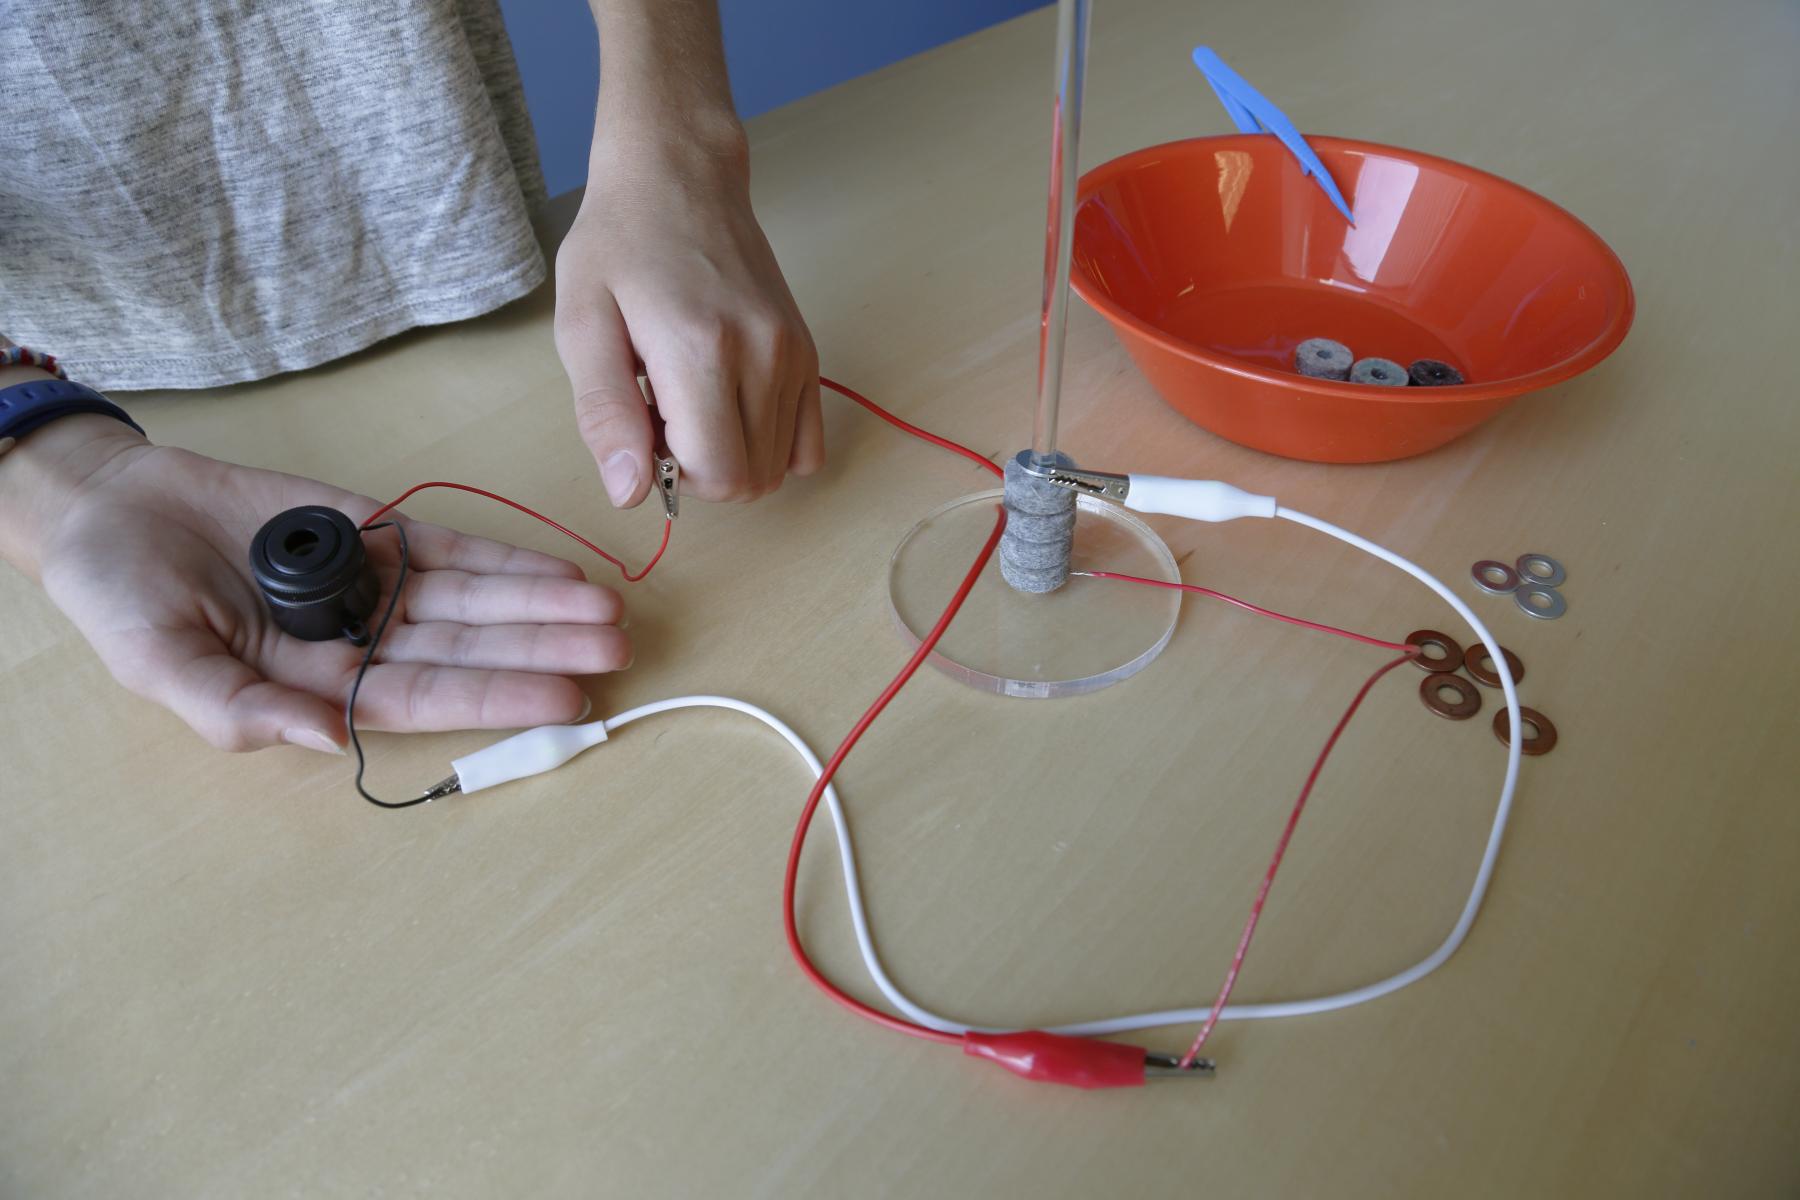 voltaic pile connected with wires to a buzzer held in someone's hand